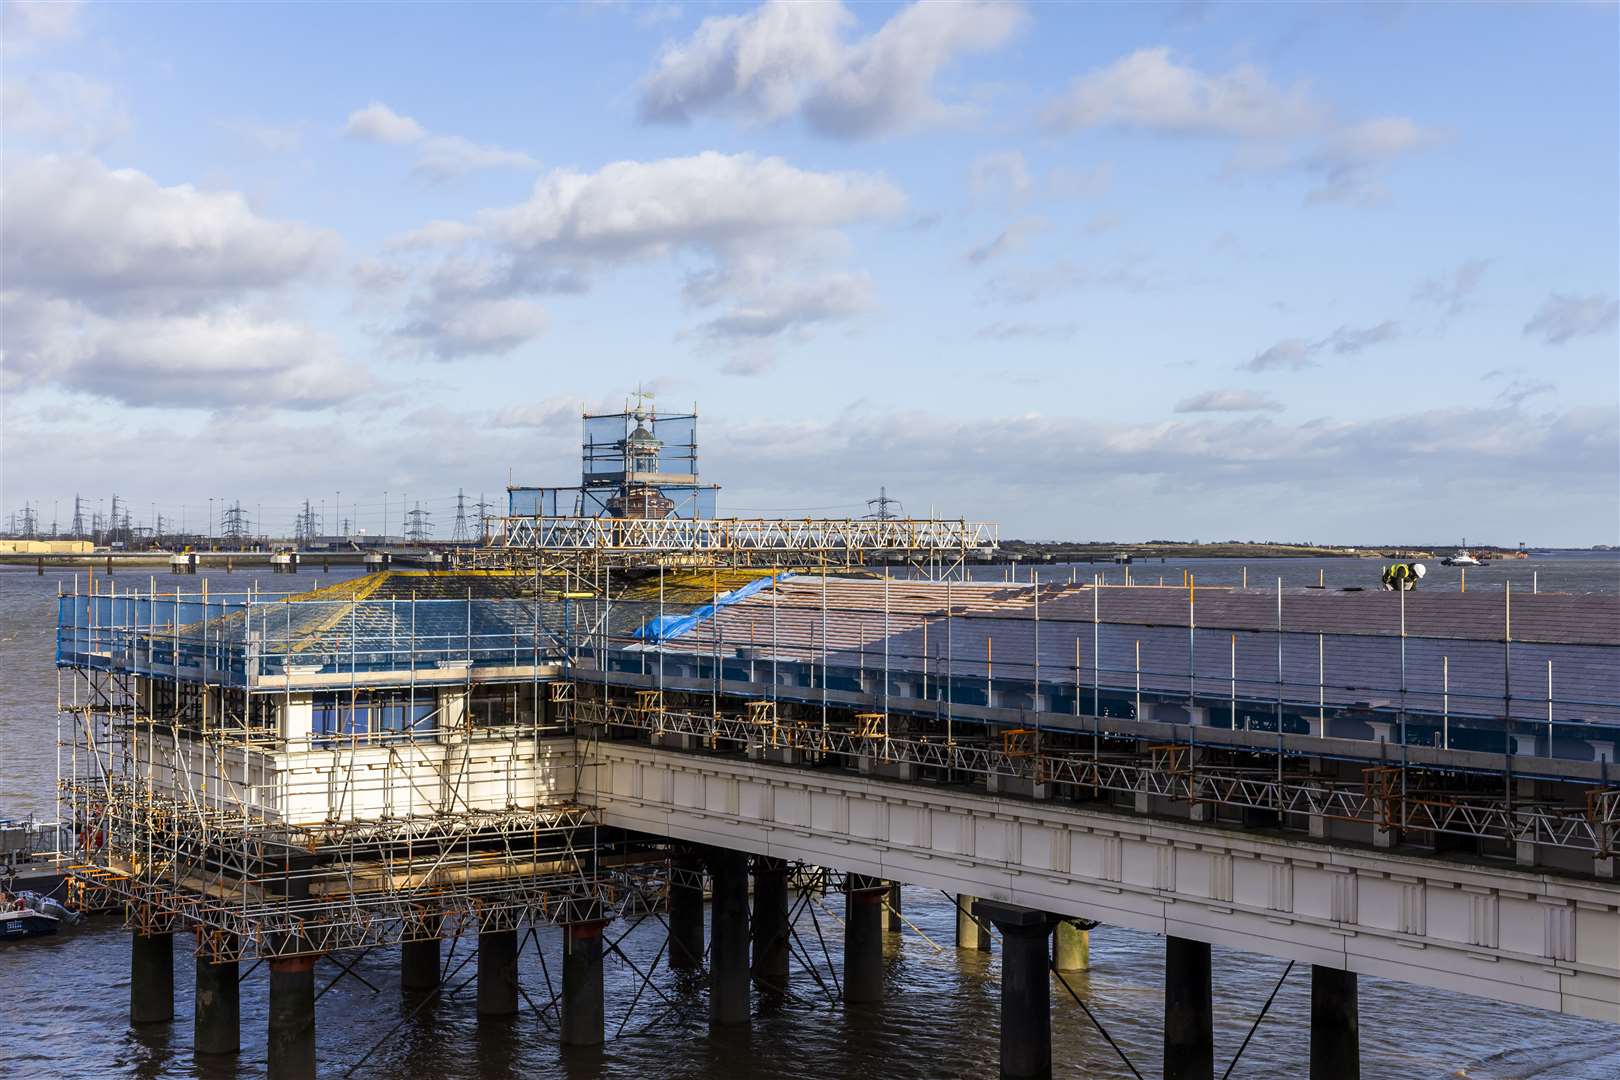 Work is also underway to refurbish the pier's roof. Picture: Port of London Authority